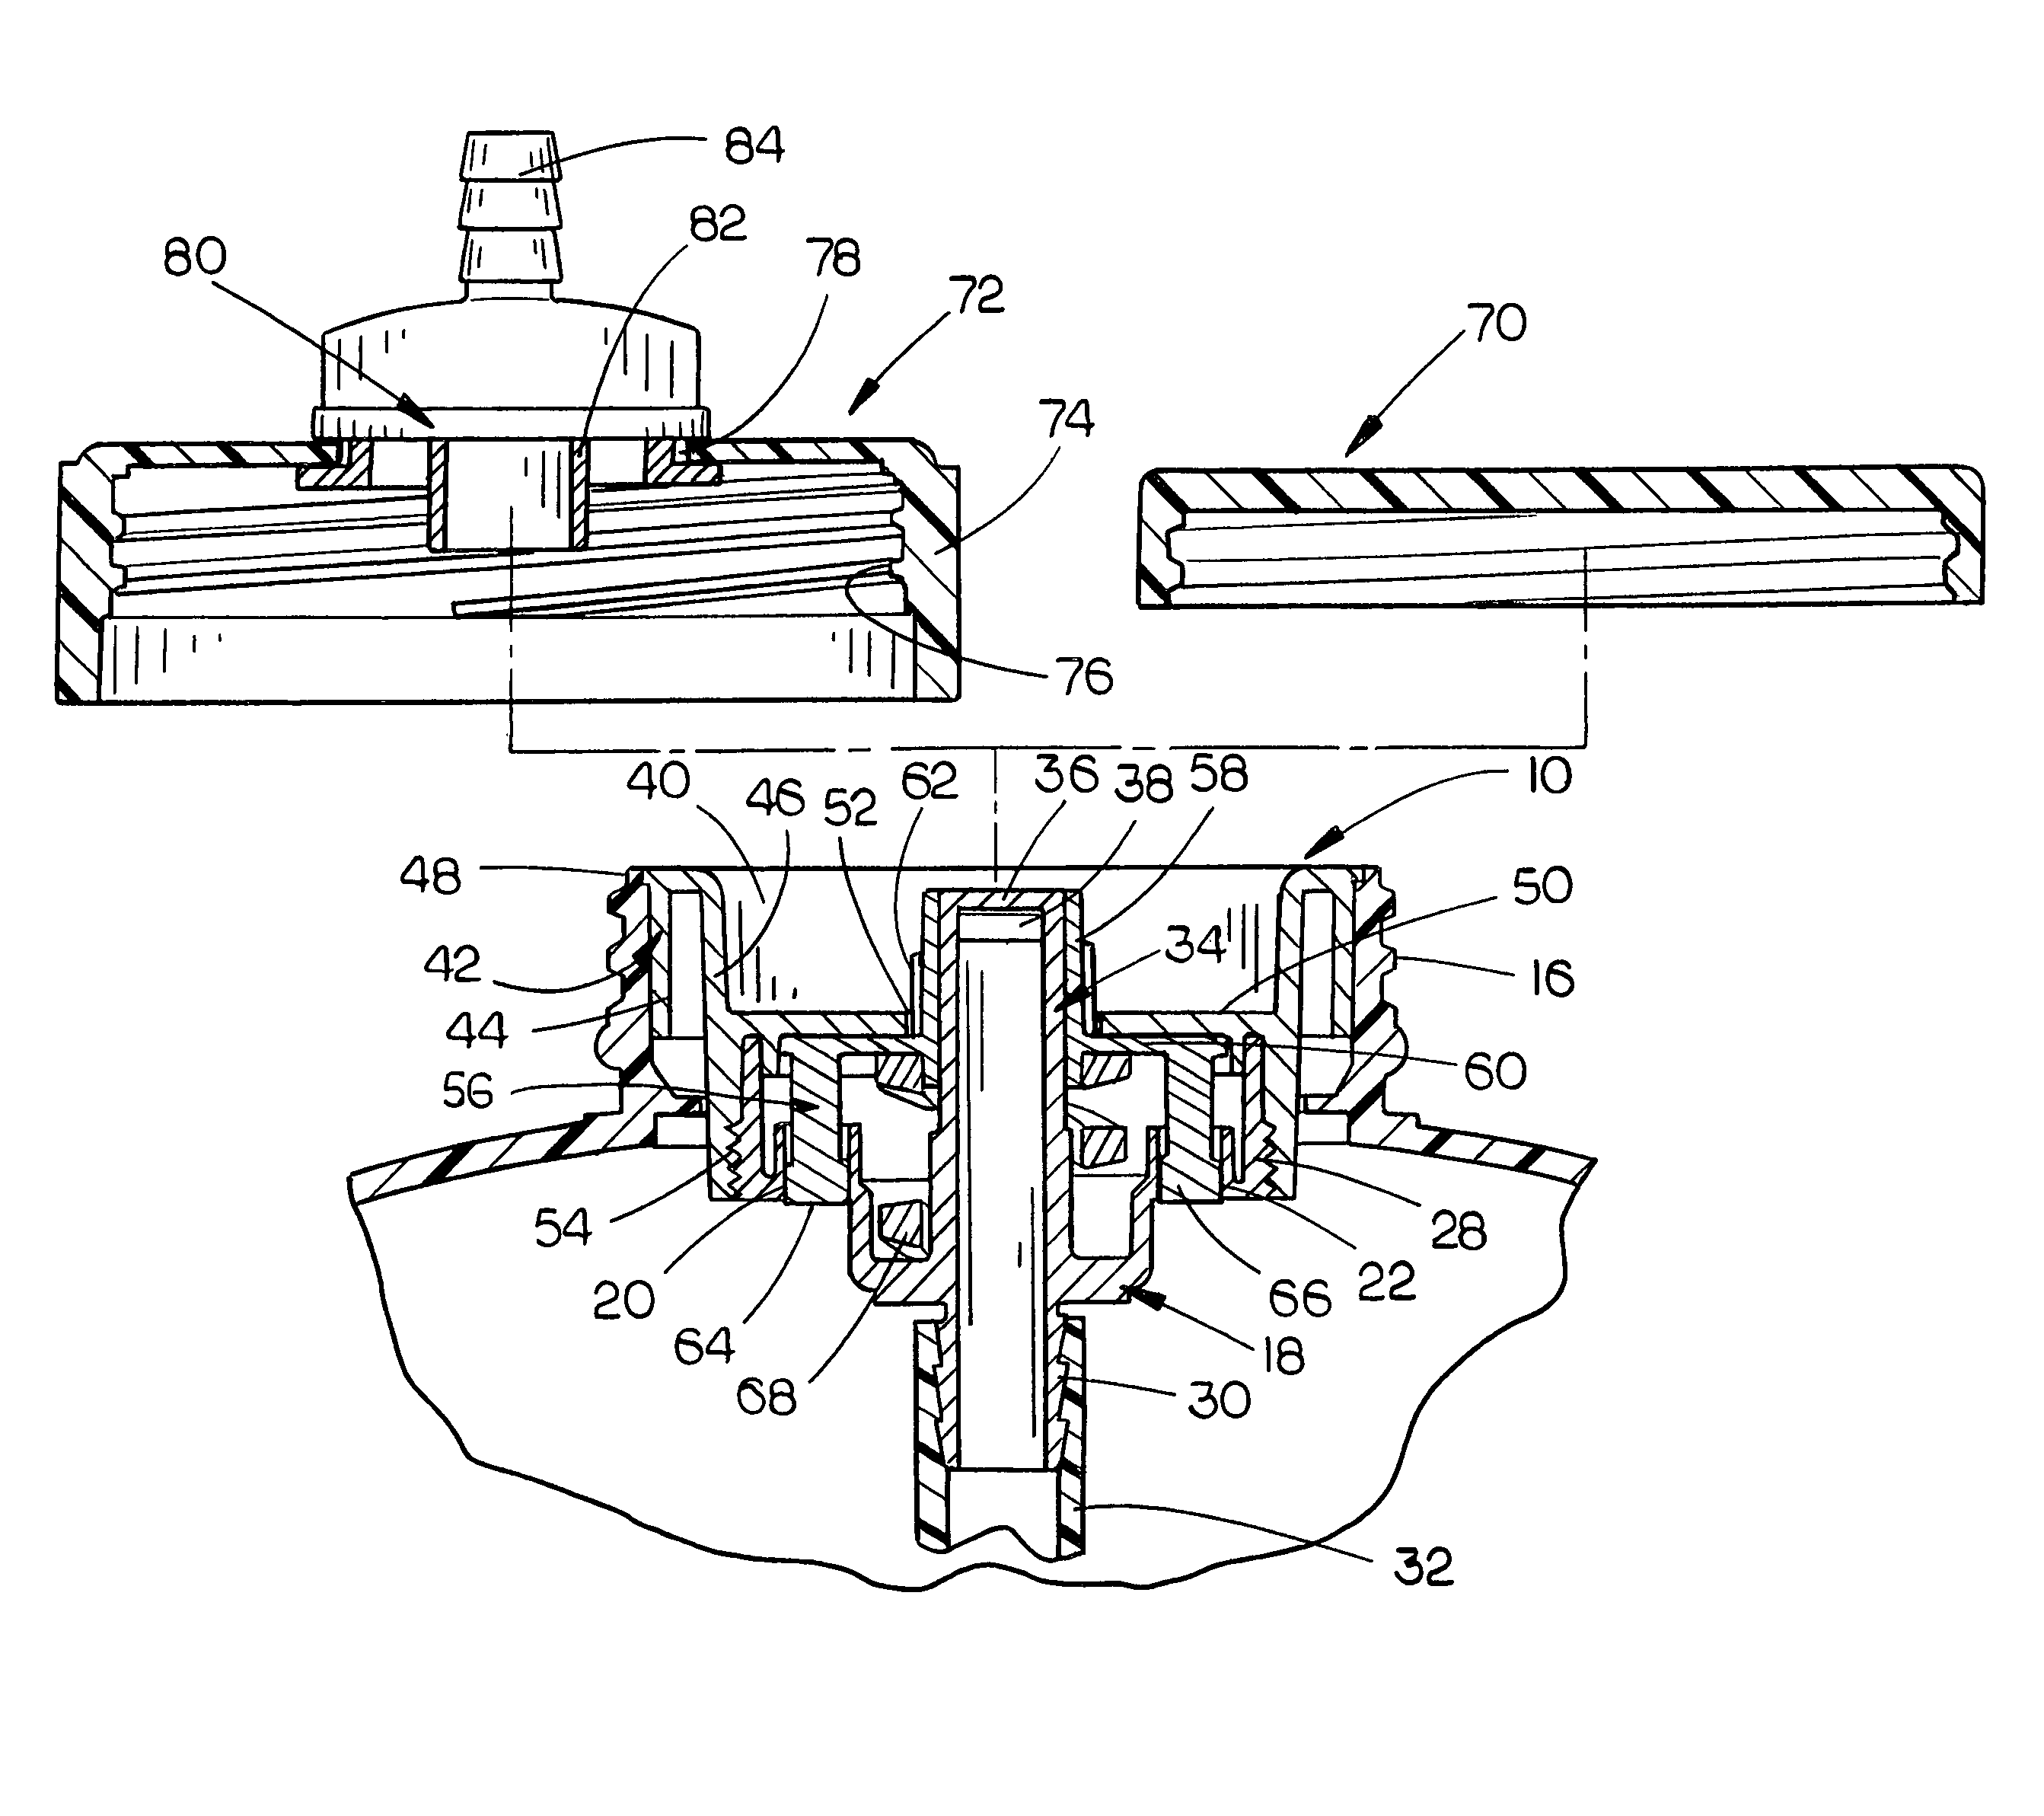 Closed loop dispensing system with mechanical venting means